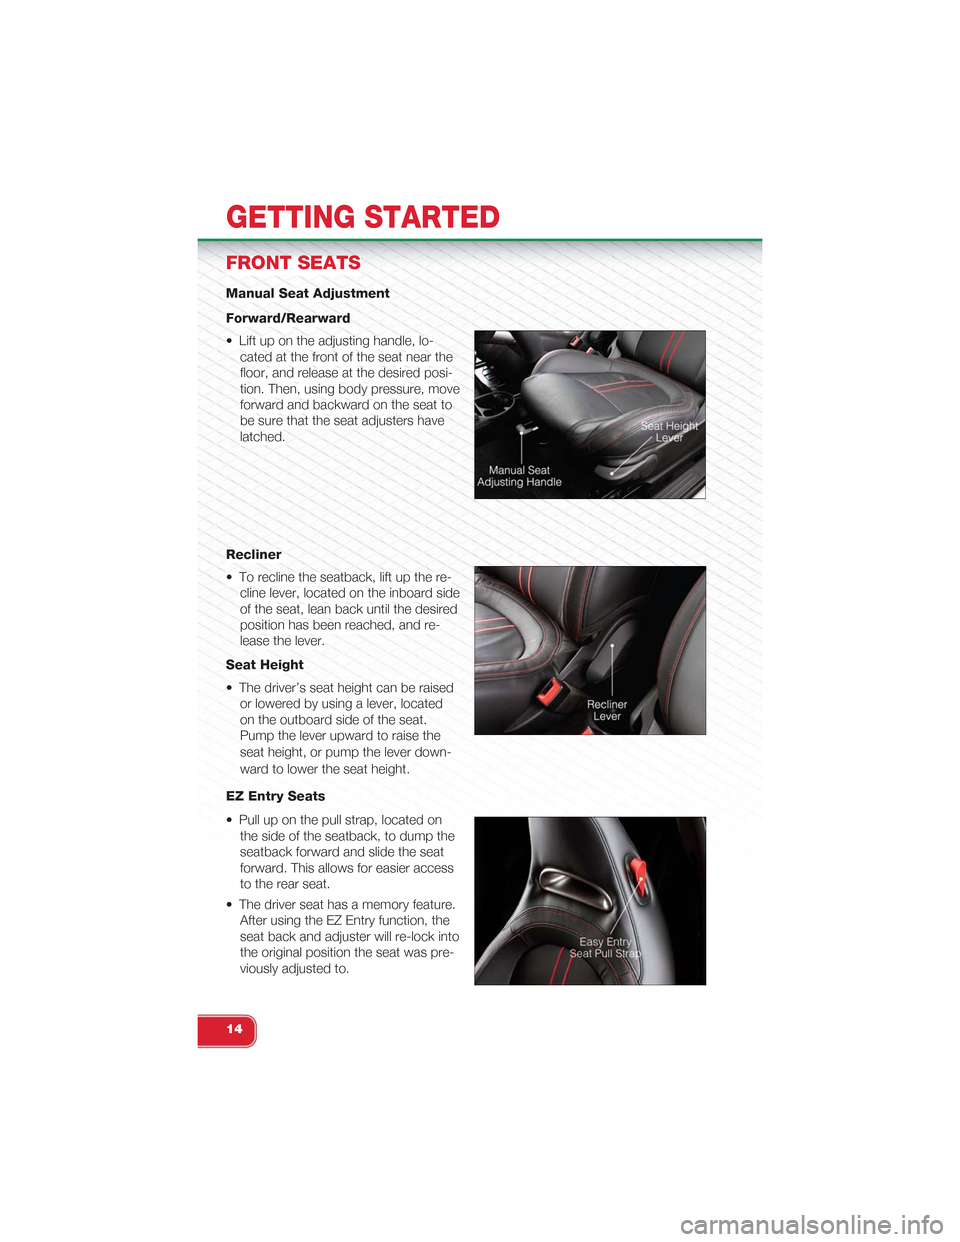 FIAT 500 ABARTH 2013 2.G User Guide FRONT SEATS
Manual Seat Adjustment
Forward/Rearward
• Lift up on the adjusting handle, lo-
cated at the front of the seat near the
floor, and release at the desired posi-
tion. Then, using body pres